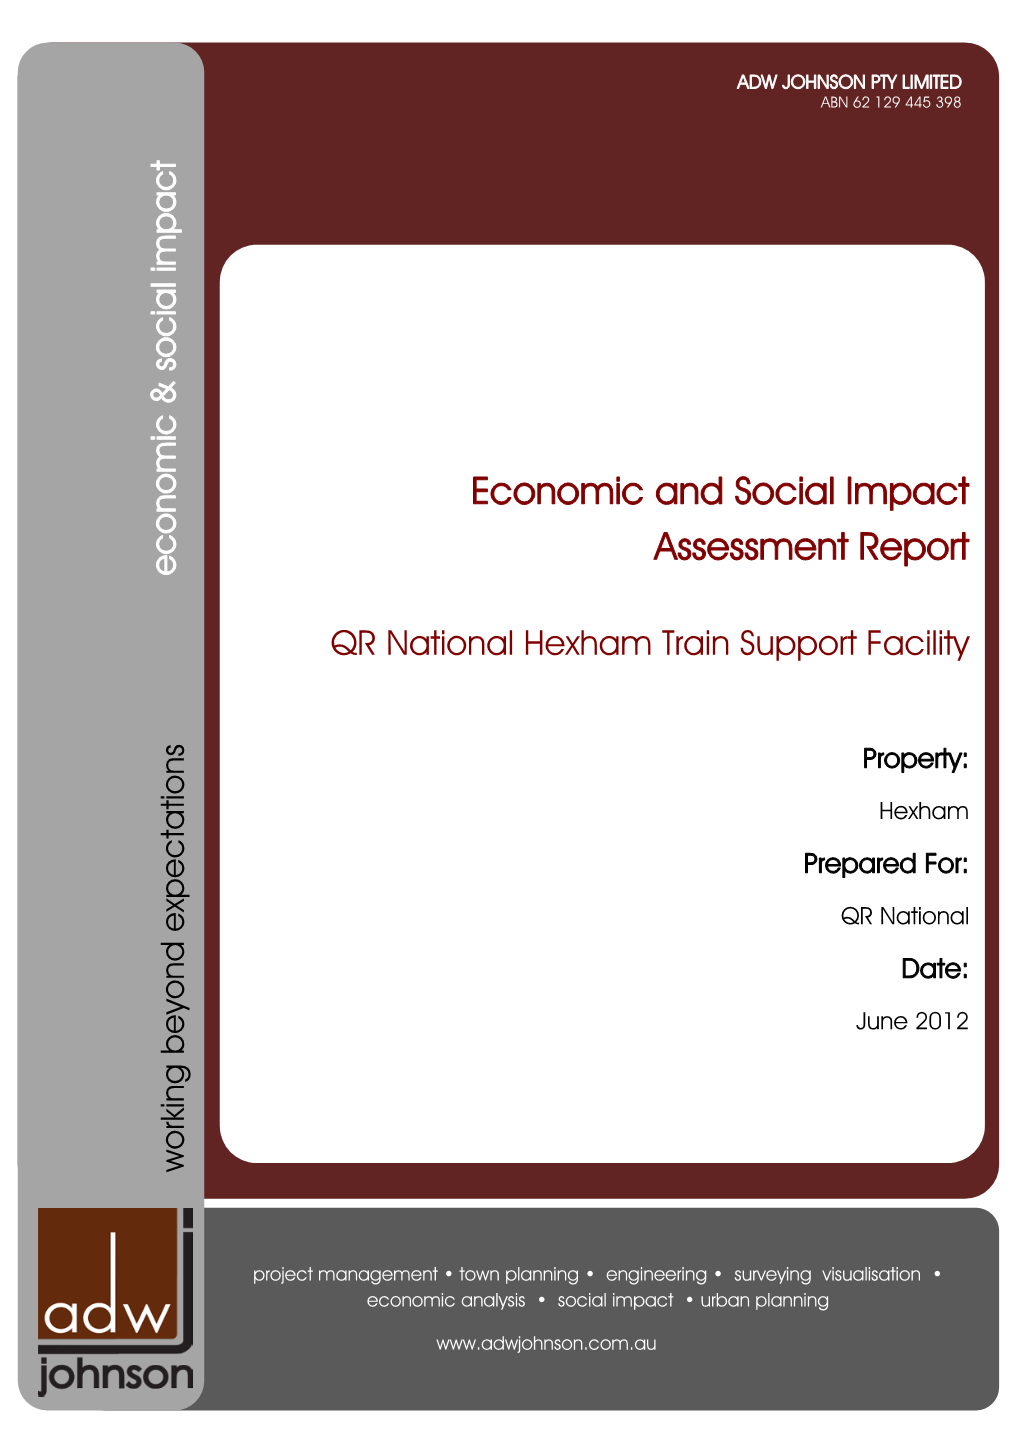 Economic and Social Impact Assessment Report